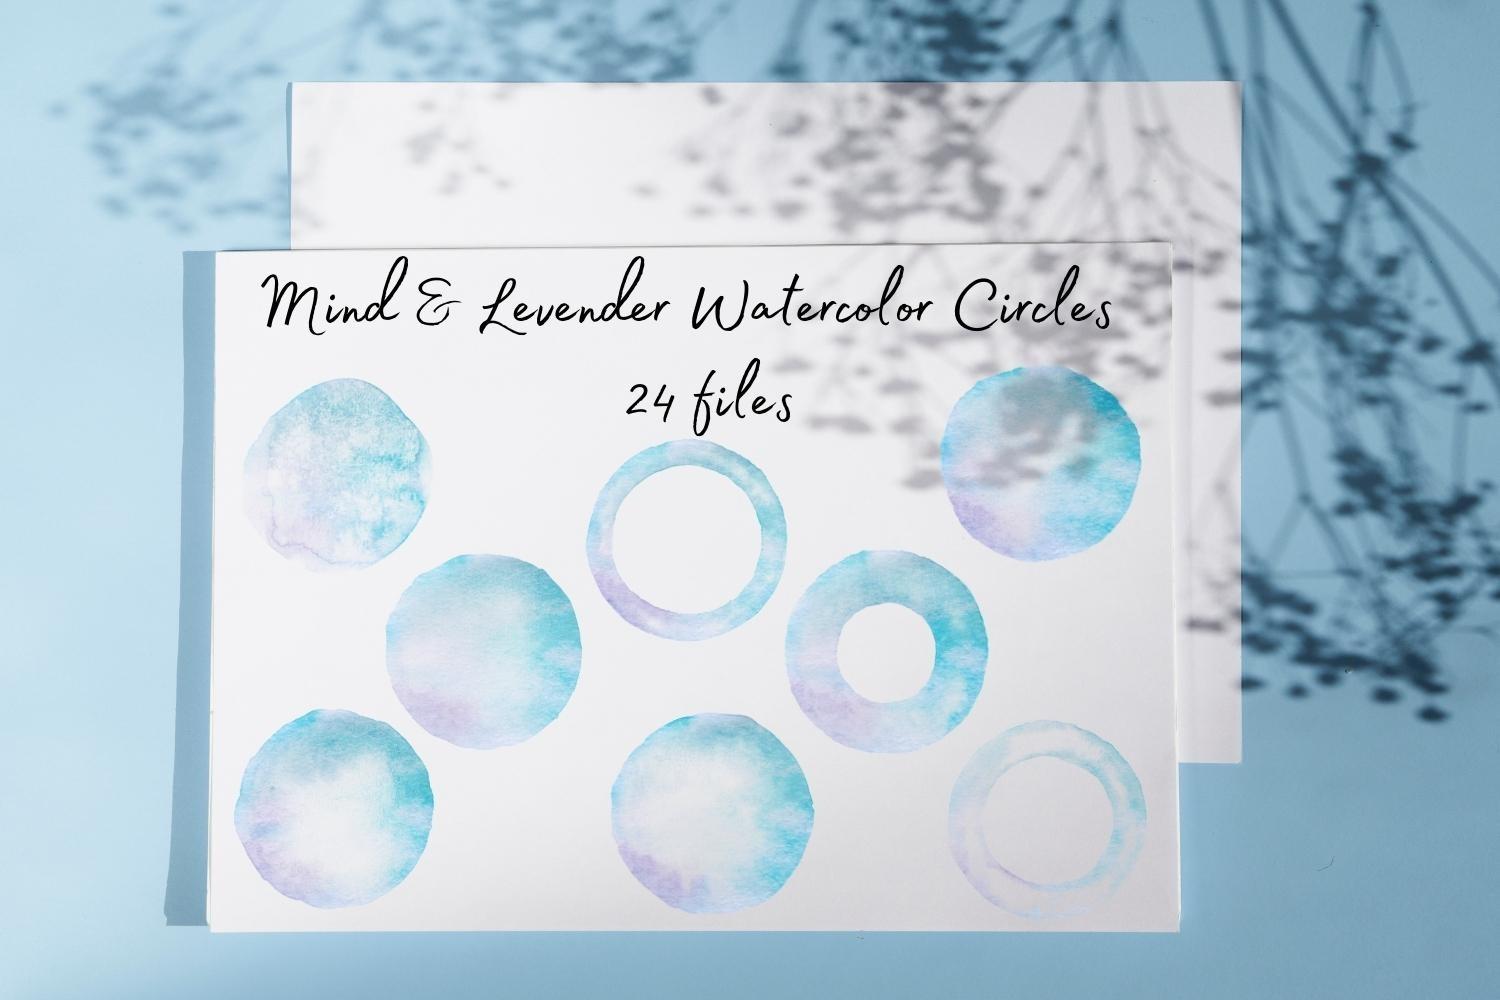 Mind and Lavender Watercolor Circles